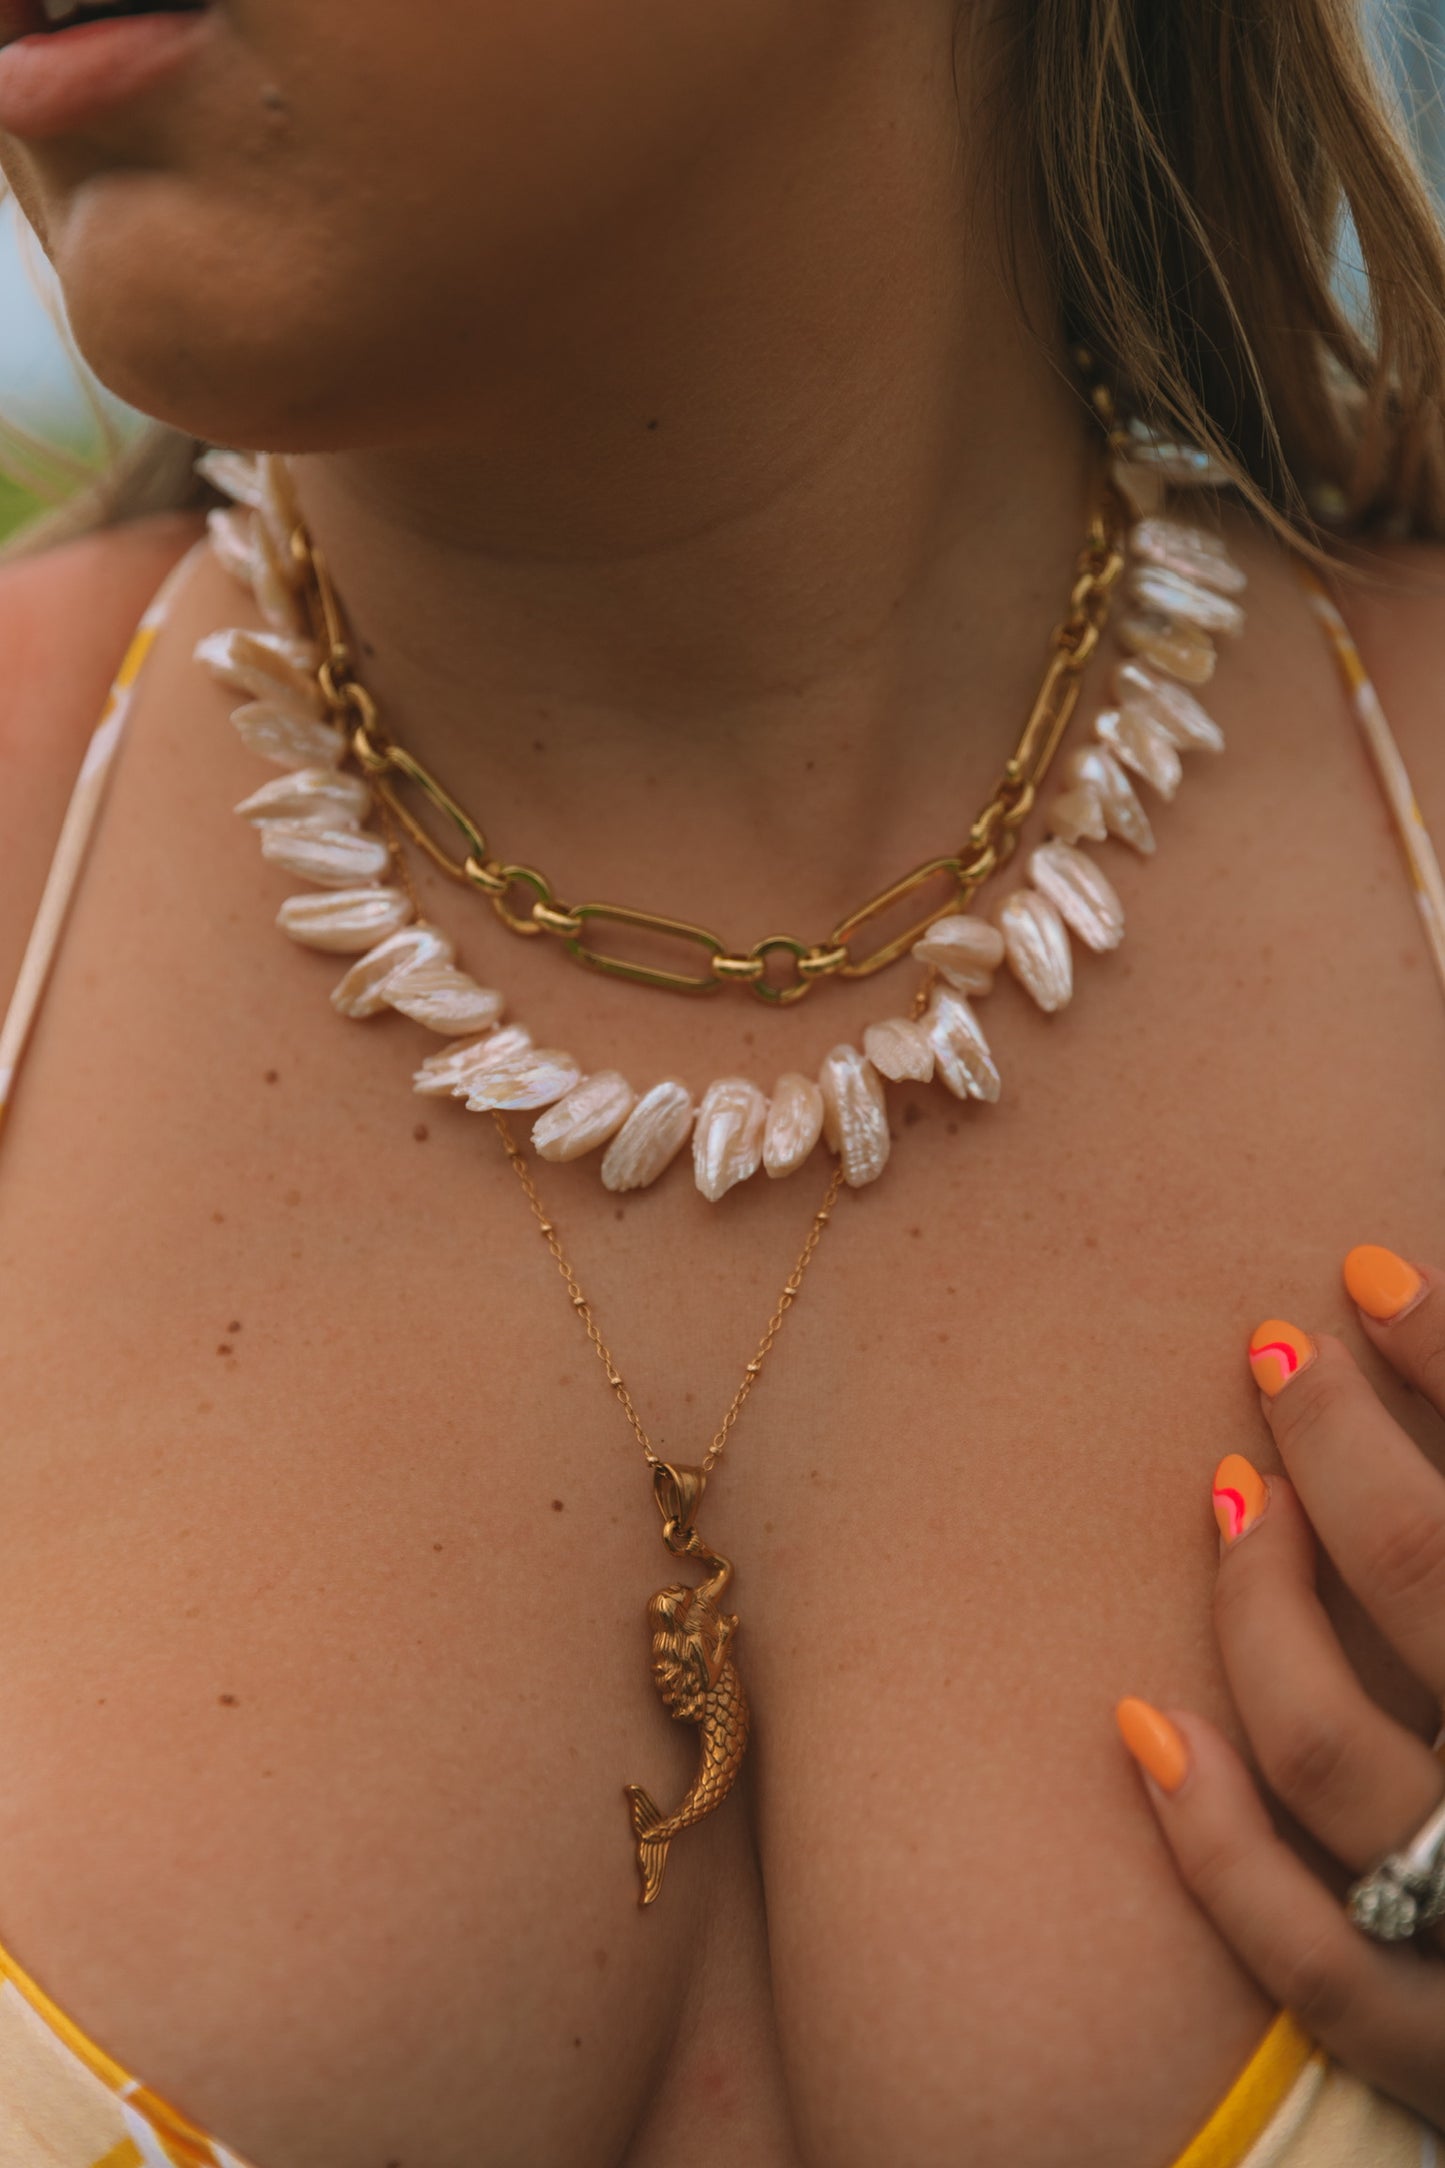 The Aisle Statement Necklace